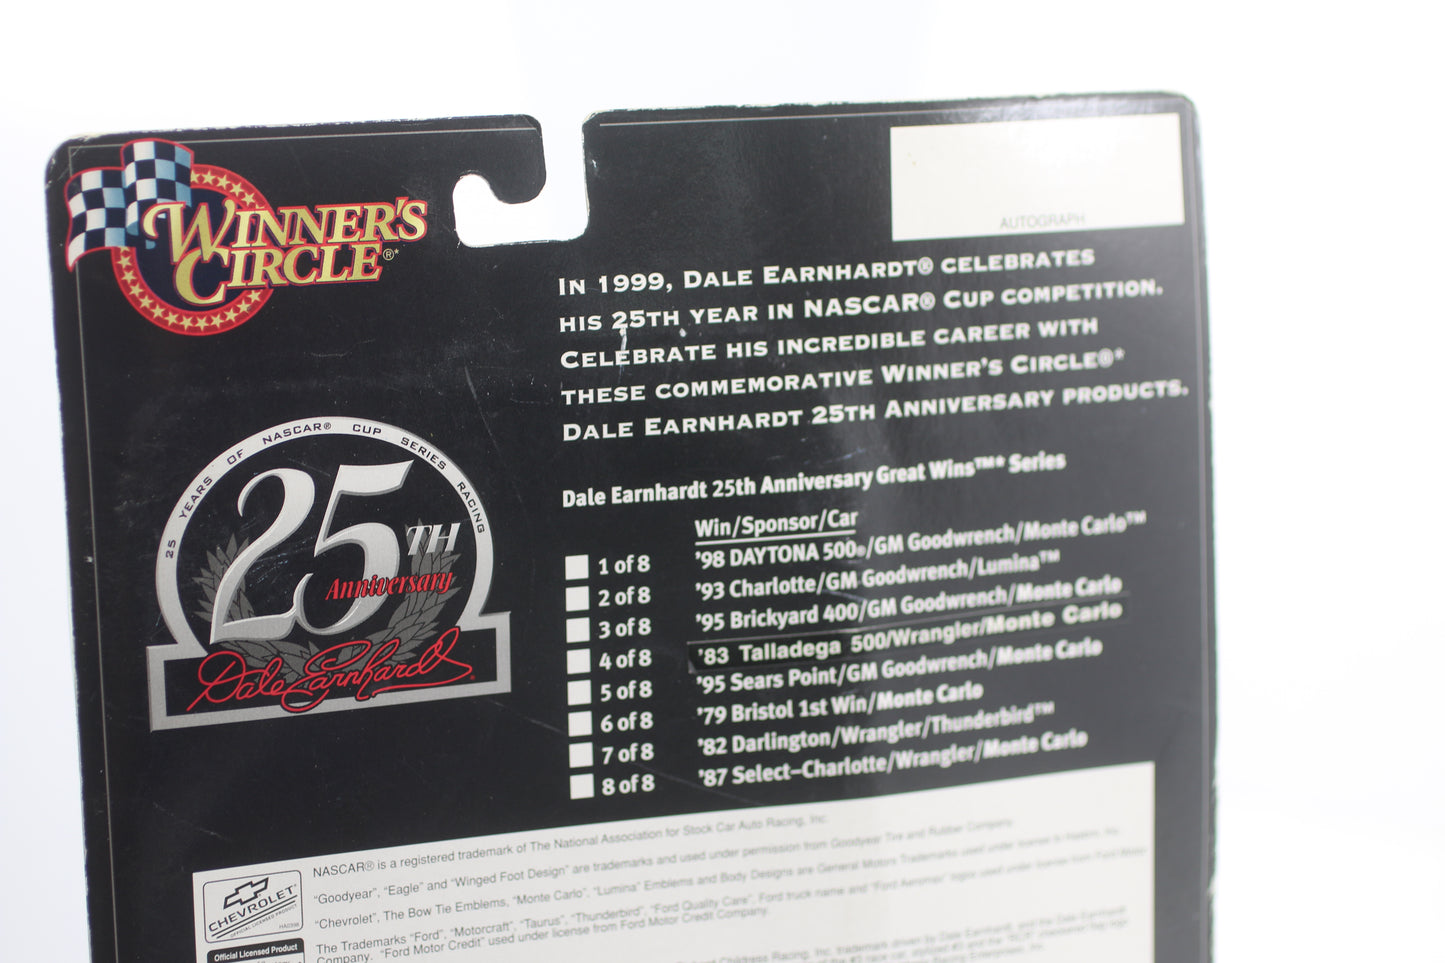 WINNERS CIRCLE 25th ANNIVERSARY DALE EARNHARDT GREAT WINS '93 Charlotte 2 of 8